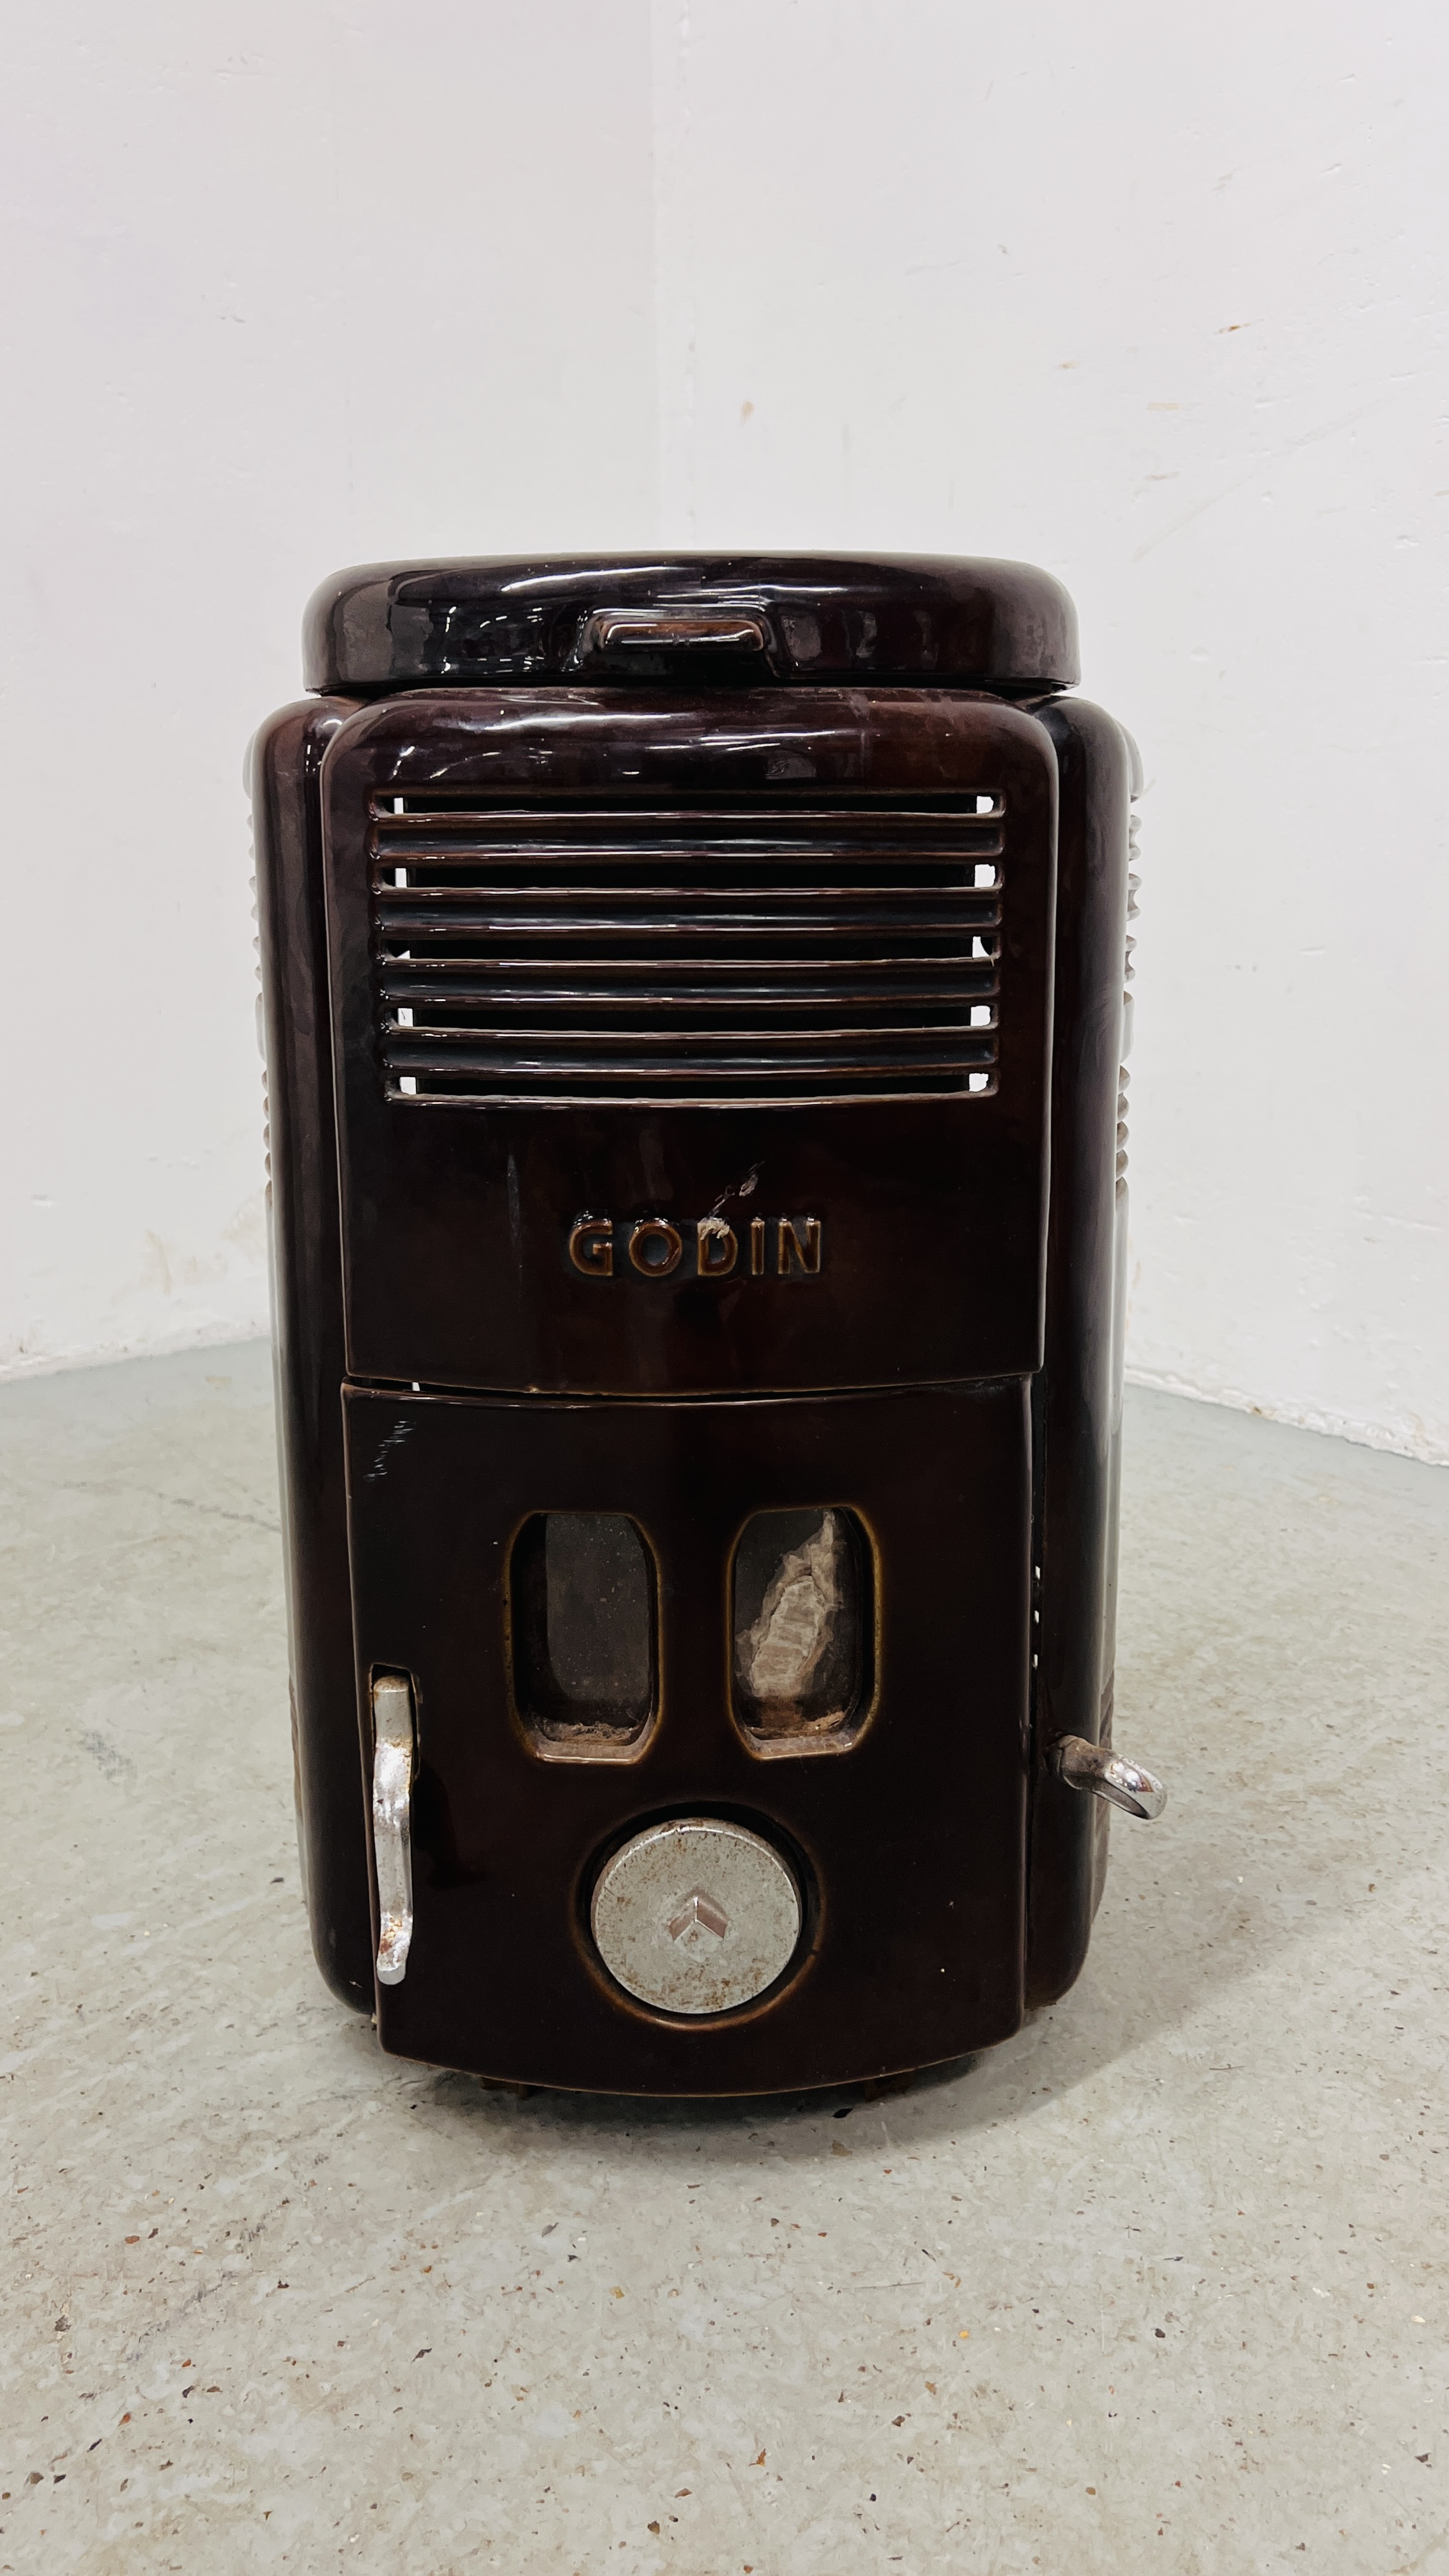 A SMALL GODIN VITREOUS ENAMELLED SOLID FUEL STOVE - HEIGHT 57CM.